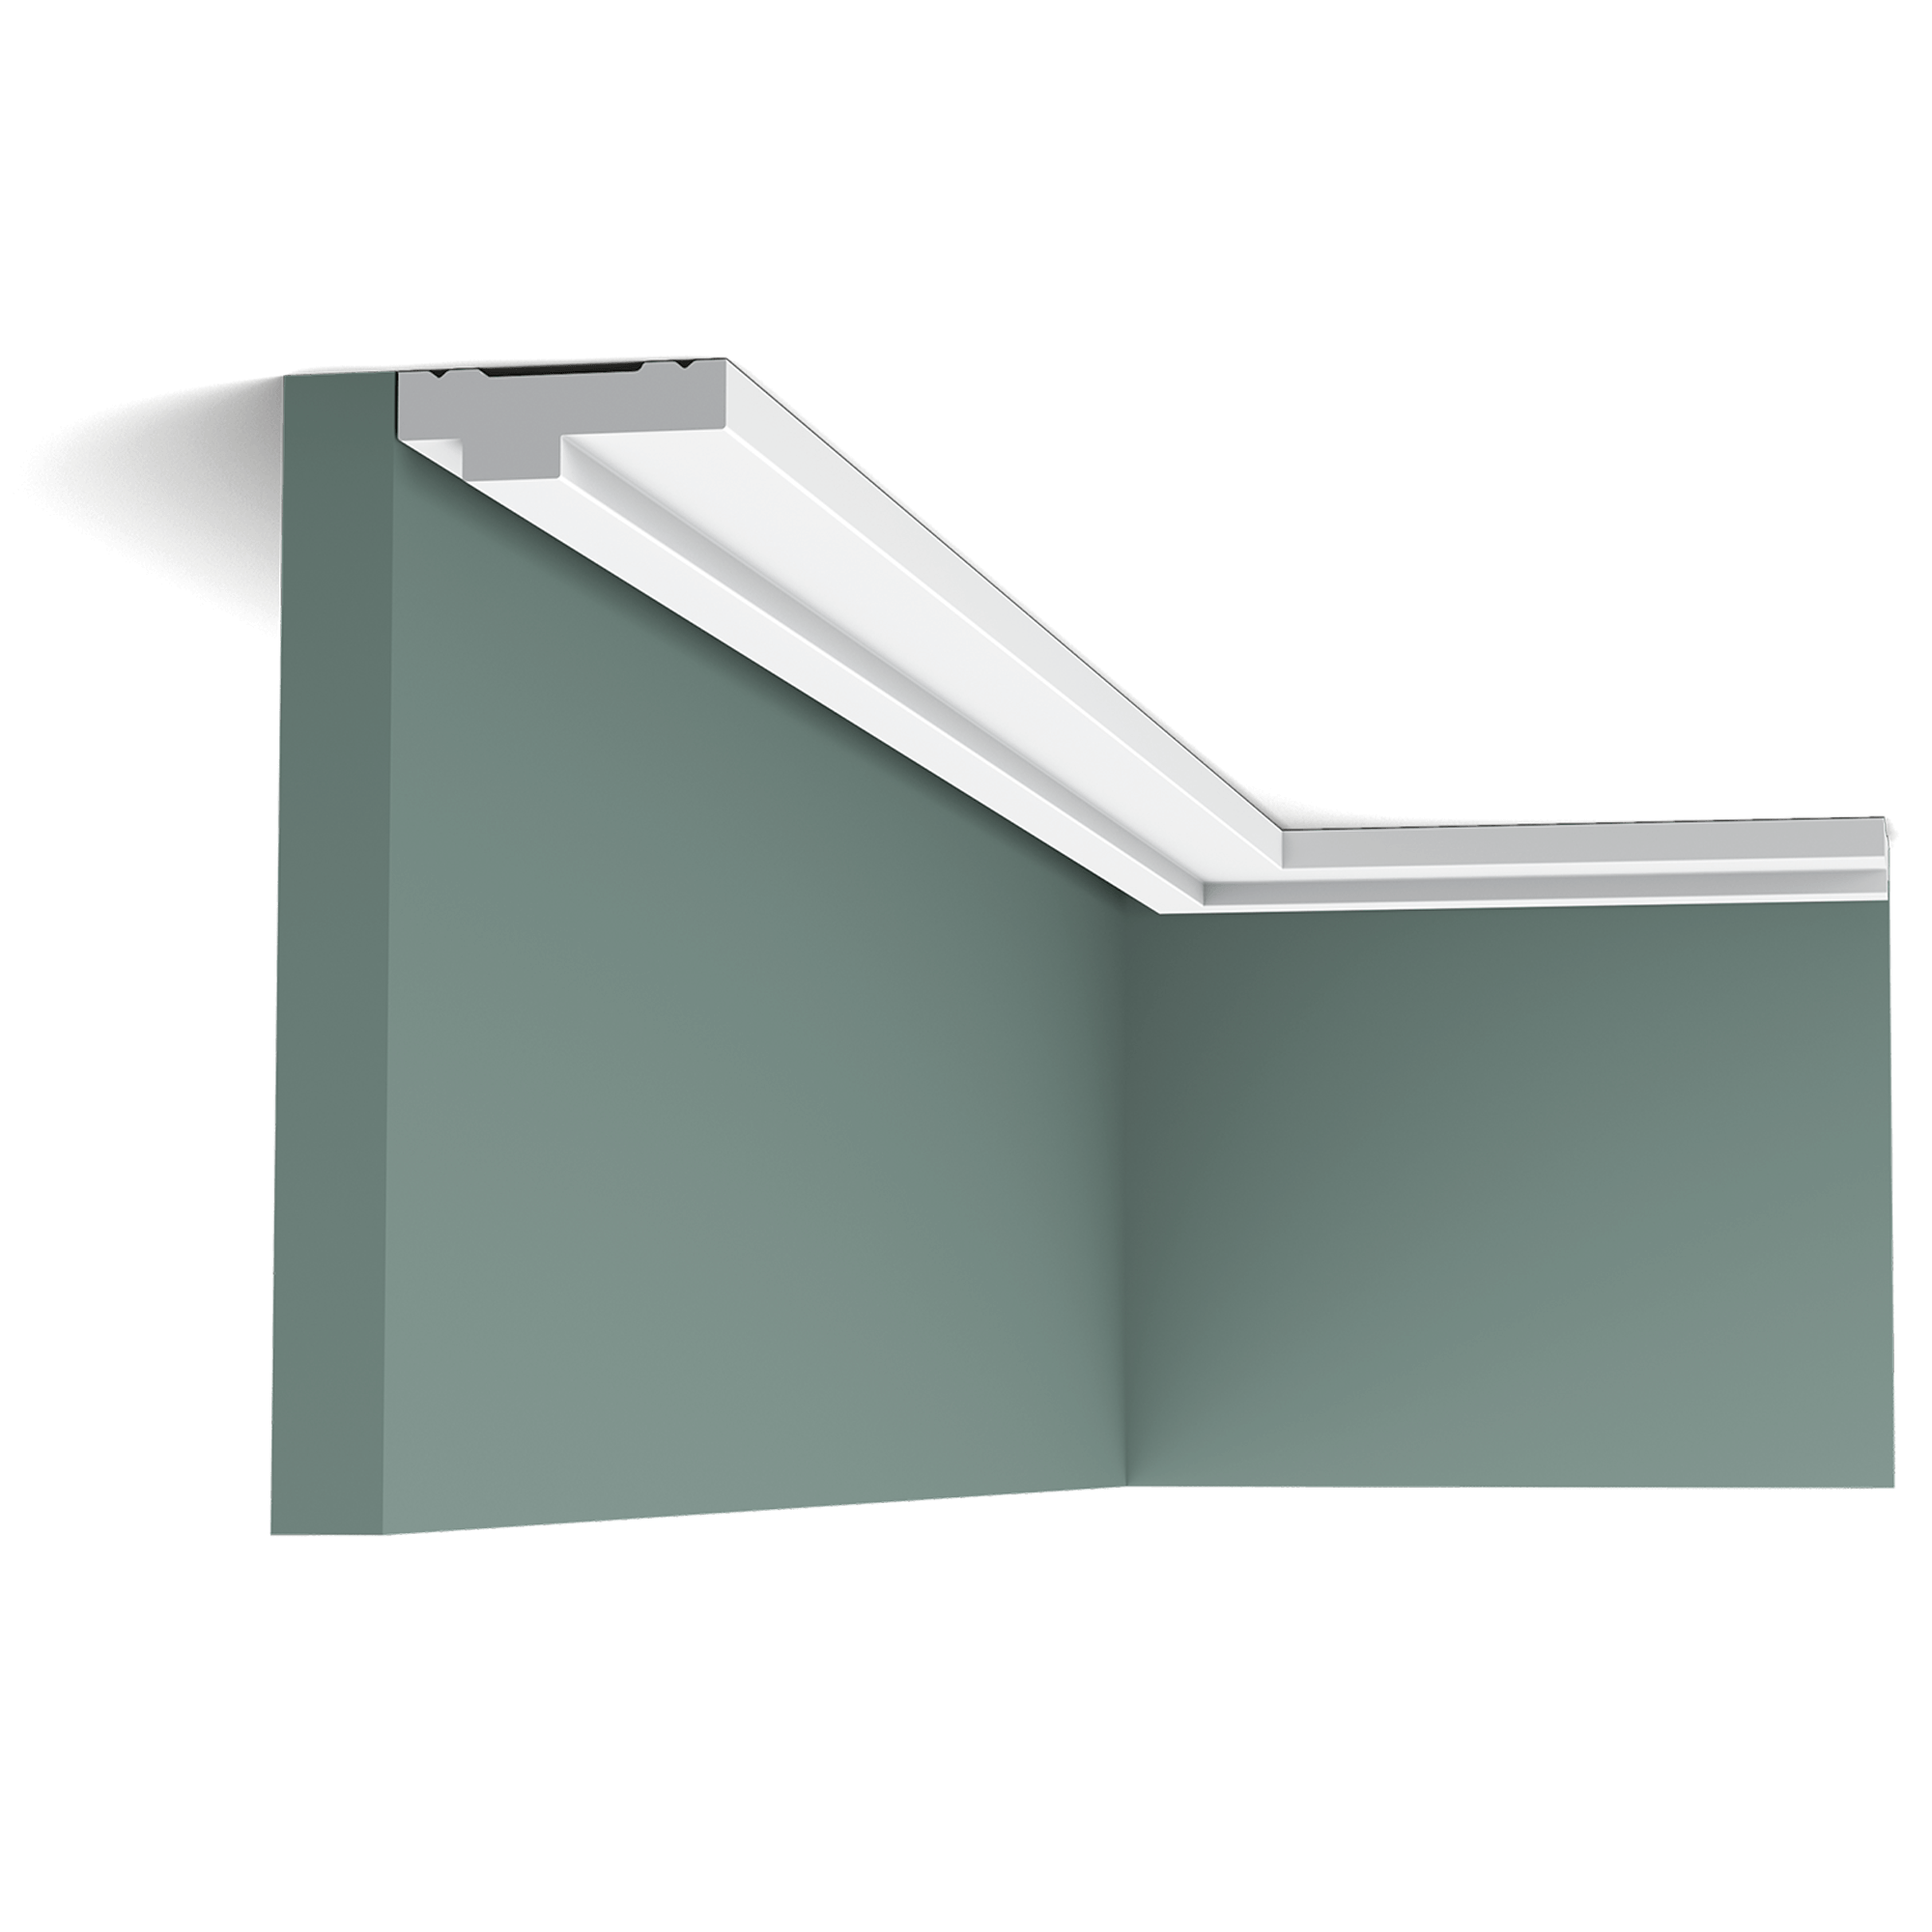 Flat cornice moulding used primarily as a border.